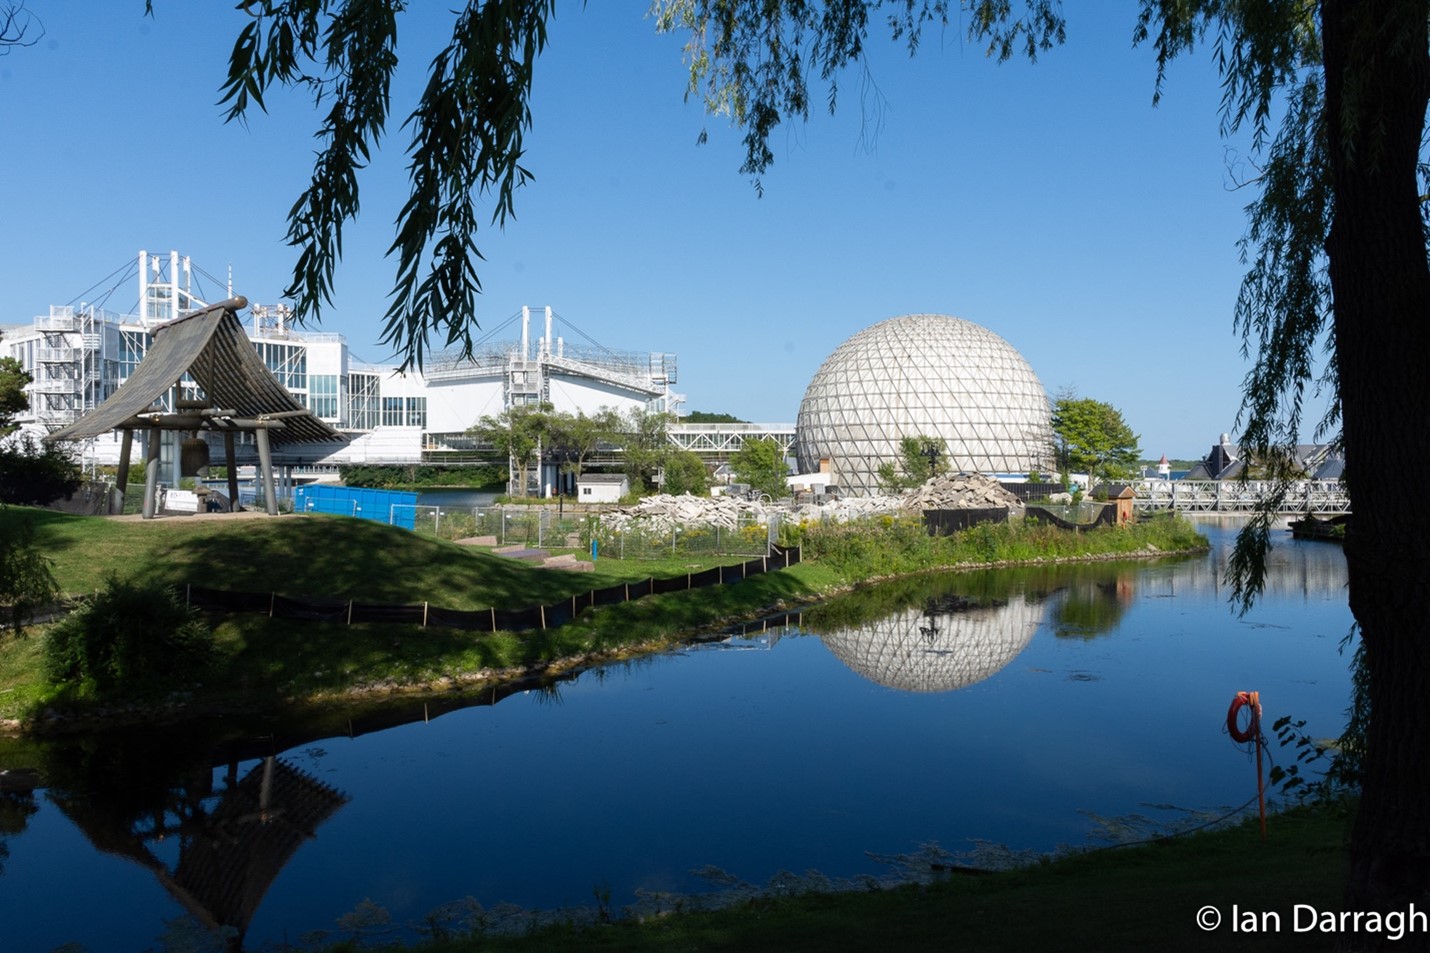 Construction fences and rubble surround the iconic Cinesphere and Gohn Ohn Bell (which commemorates the centennial of Japanese settlement in Canada) as work has already started on the redevelopment of Ontario Place’s West Island.